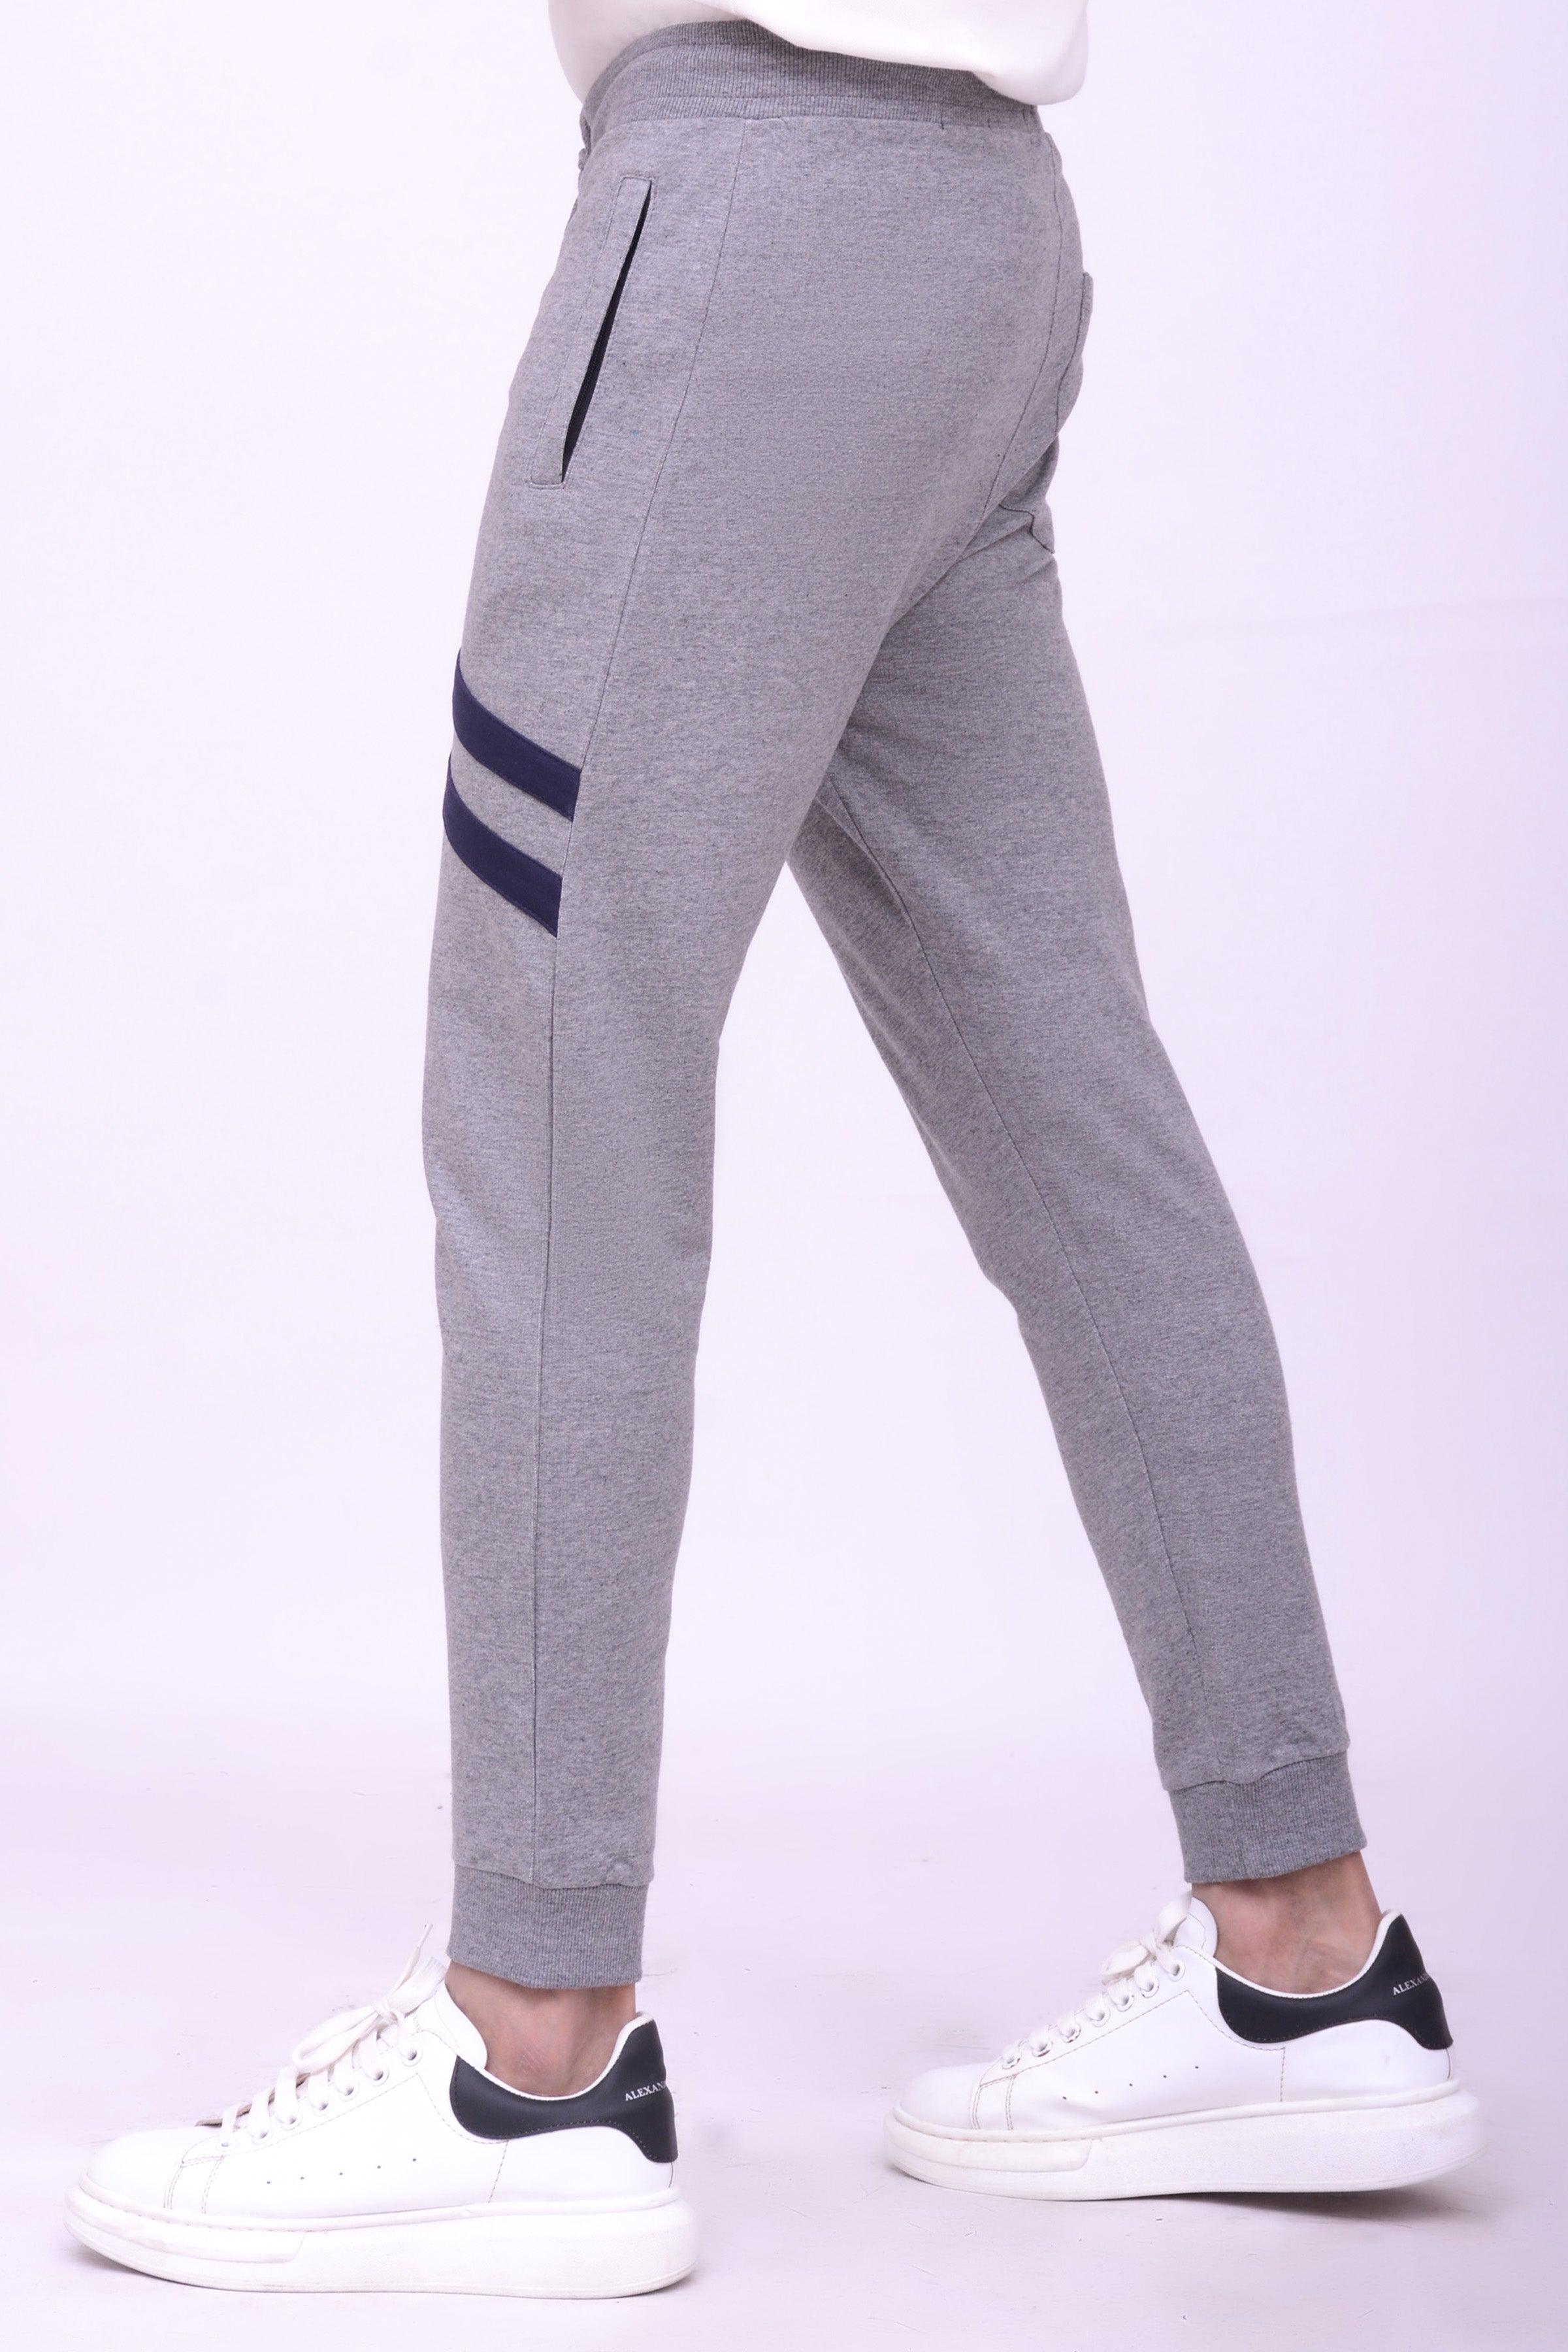 CROSS PANEL TERRY TROUSER DARK GREY at Charcoal Clothing